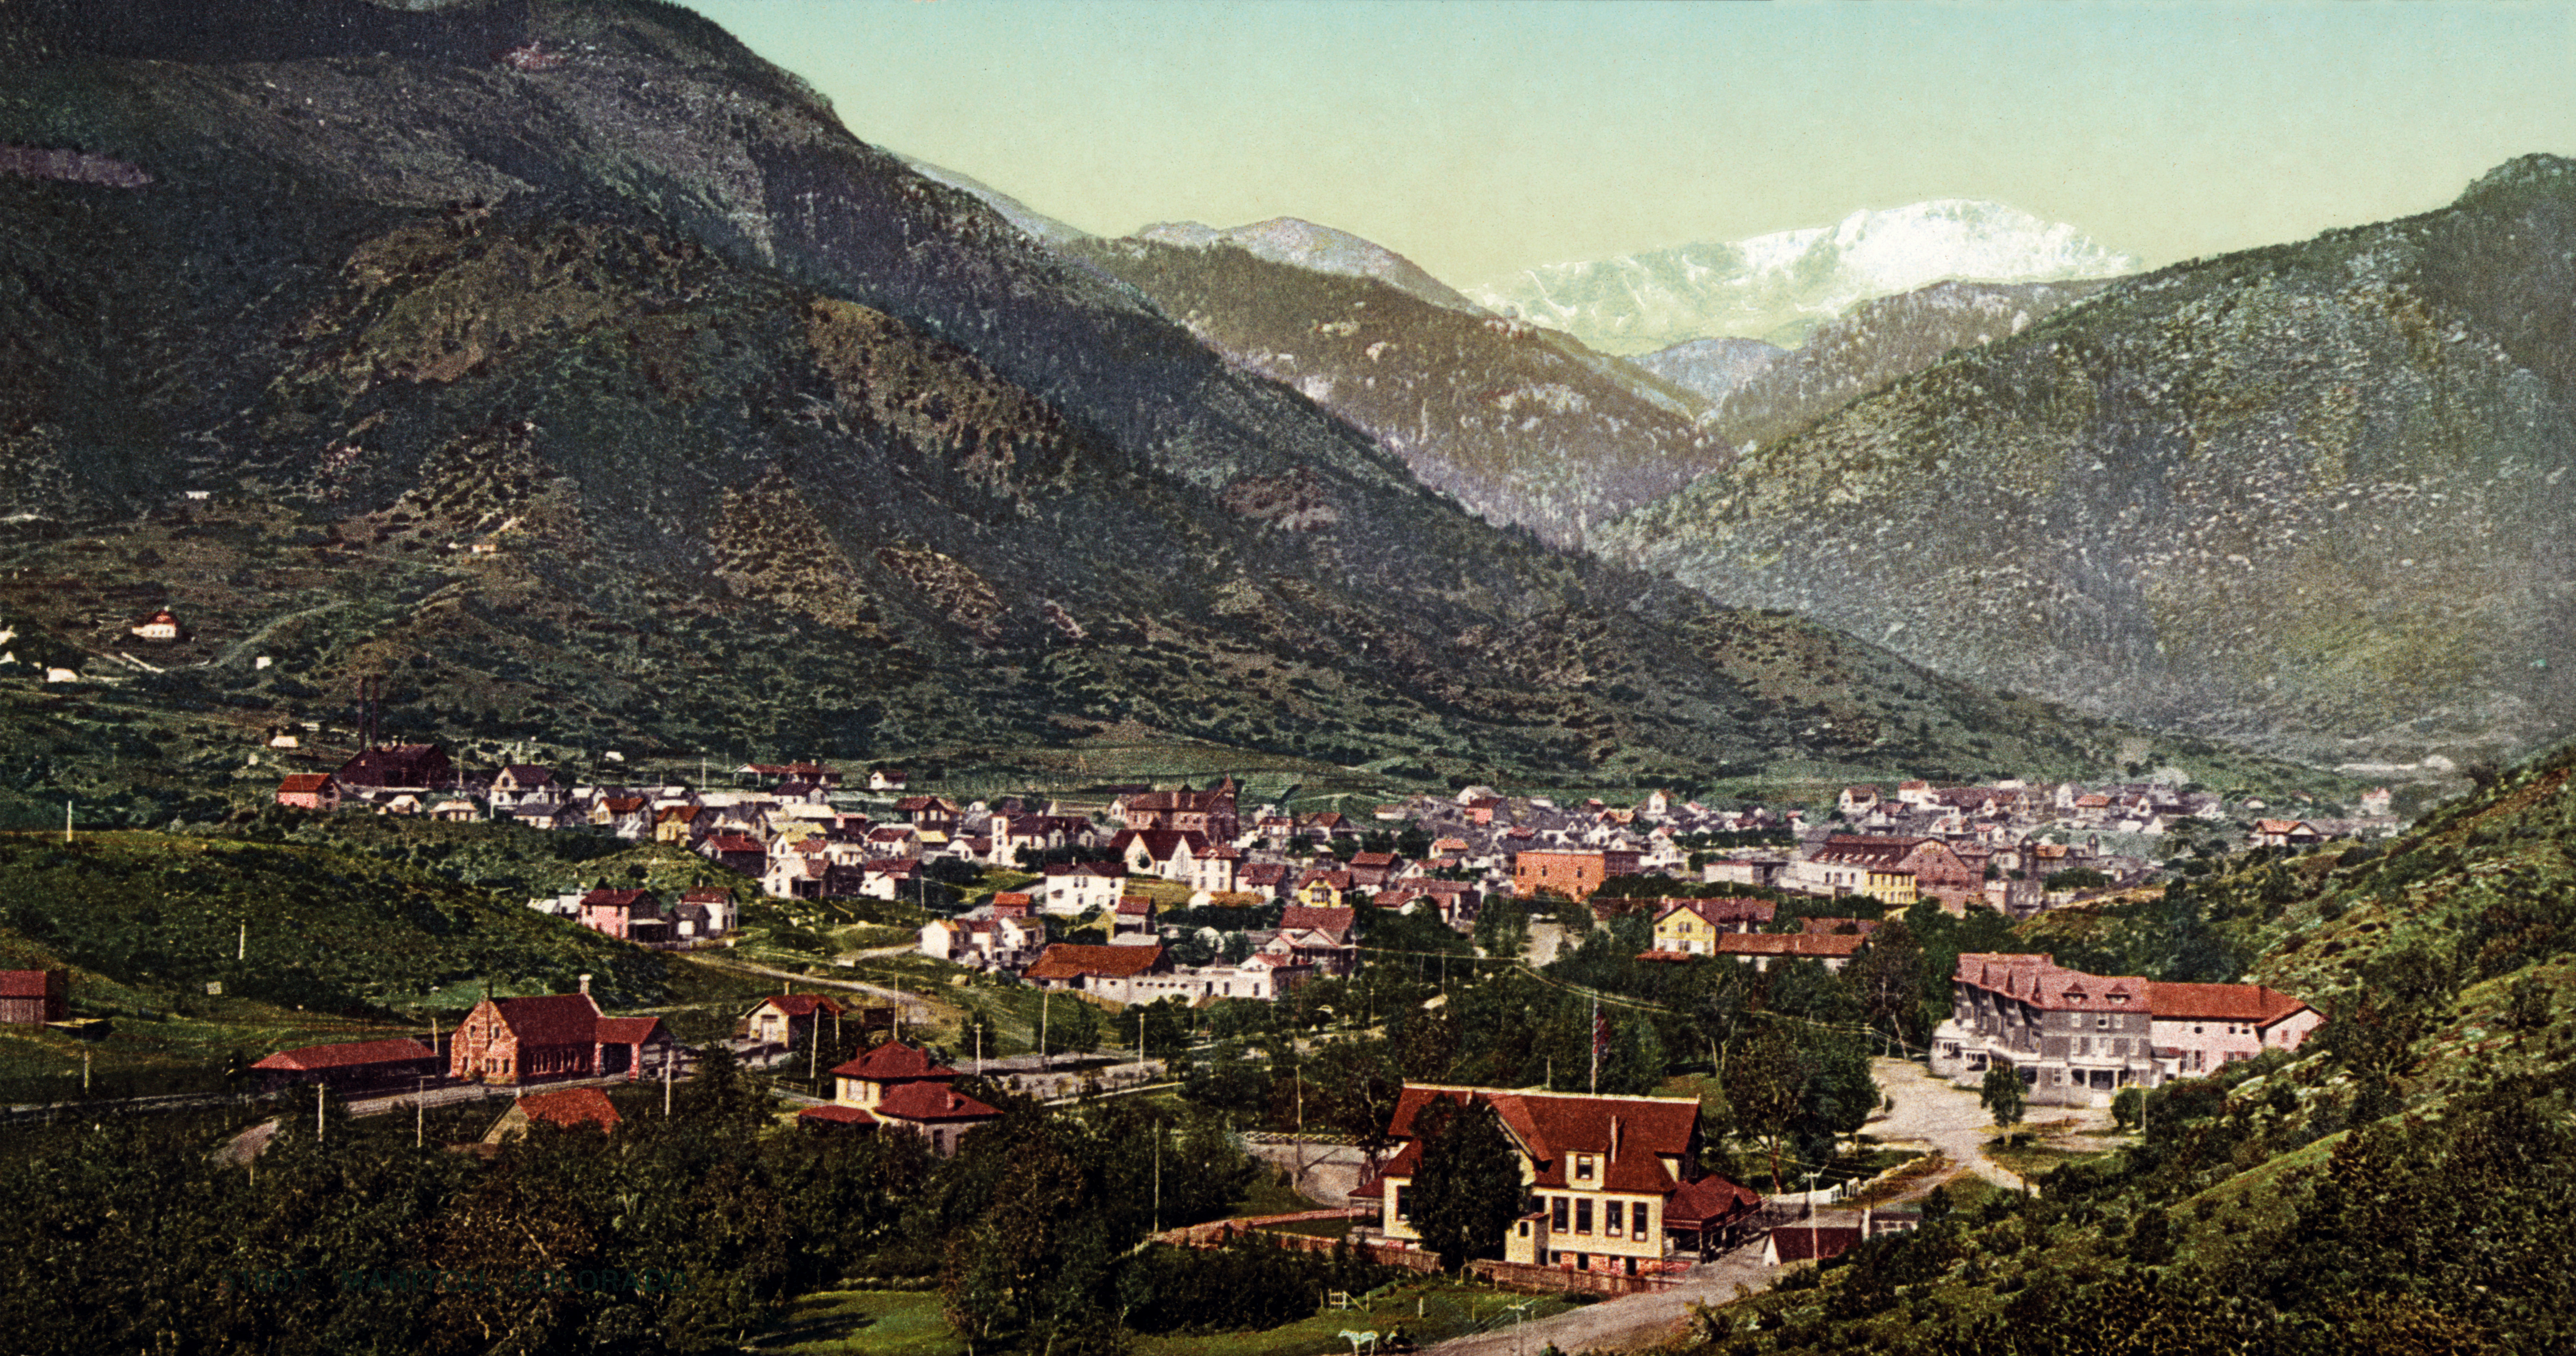 Manitou Springs, CO, in 1902. From the Public Domain. Photo source: Wikipedia